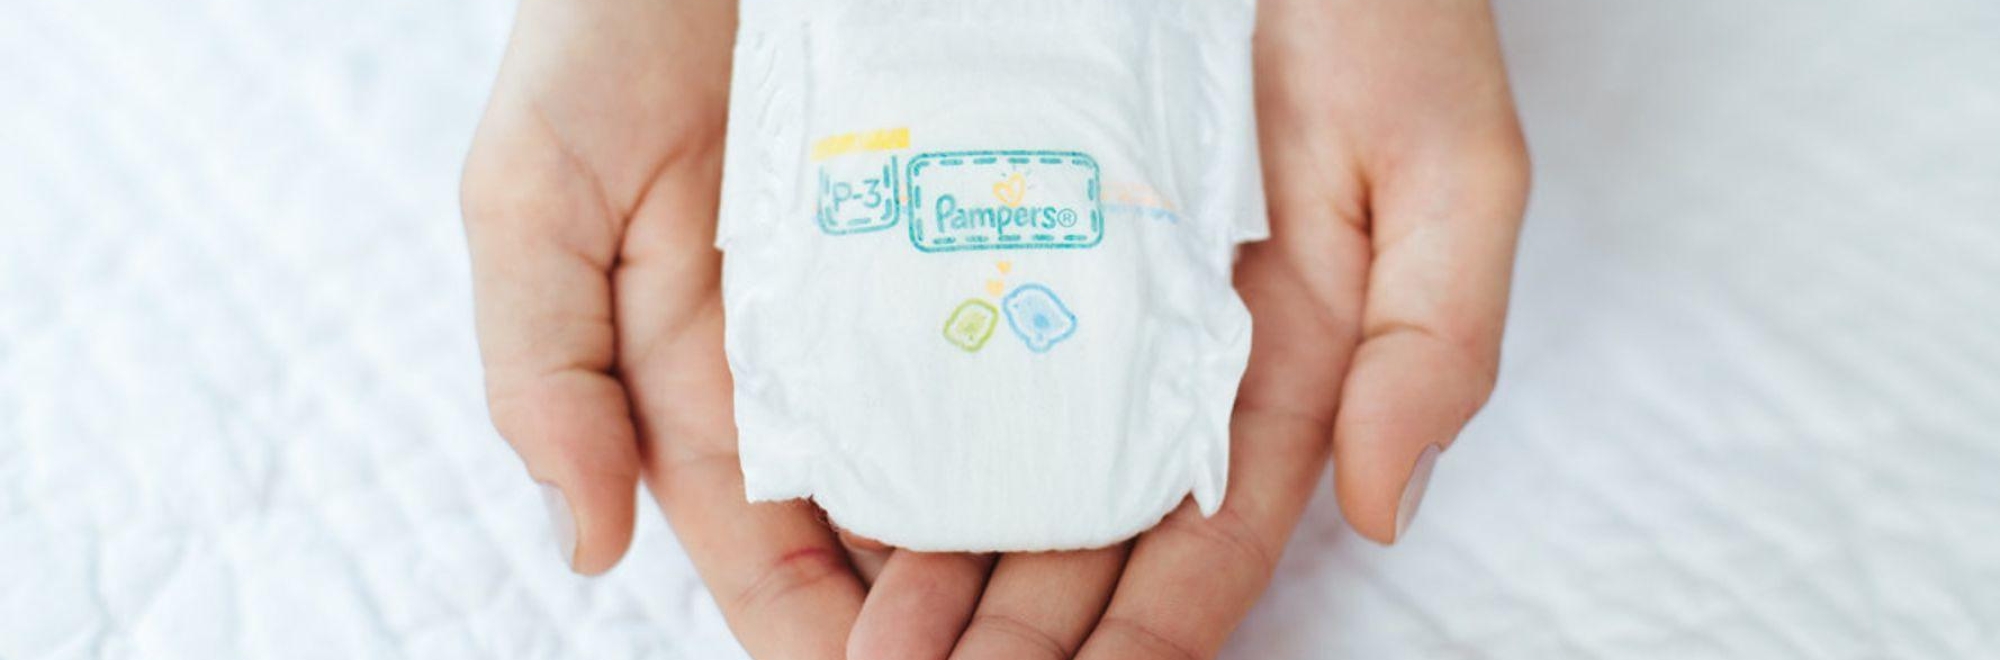 Pampers Sleep Is Everything Campaign Helps Premature Babies To Rest In Comfort Creative Moment